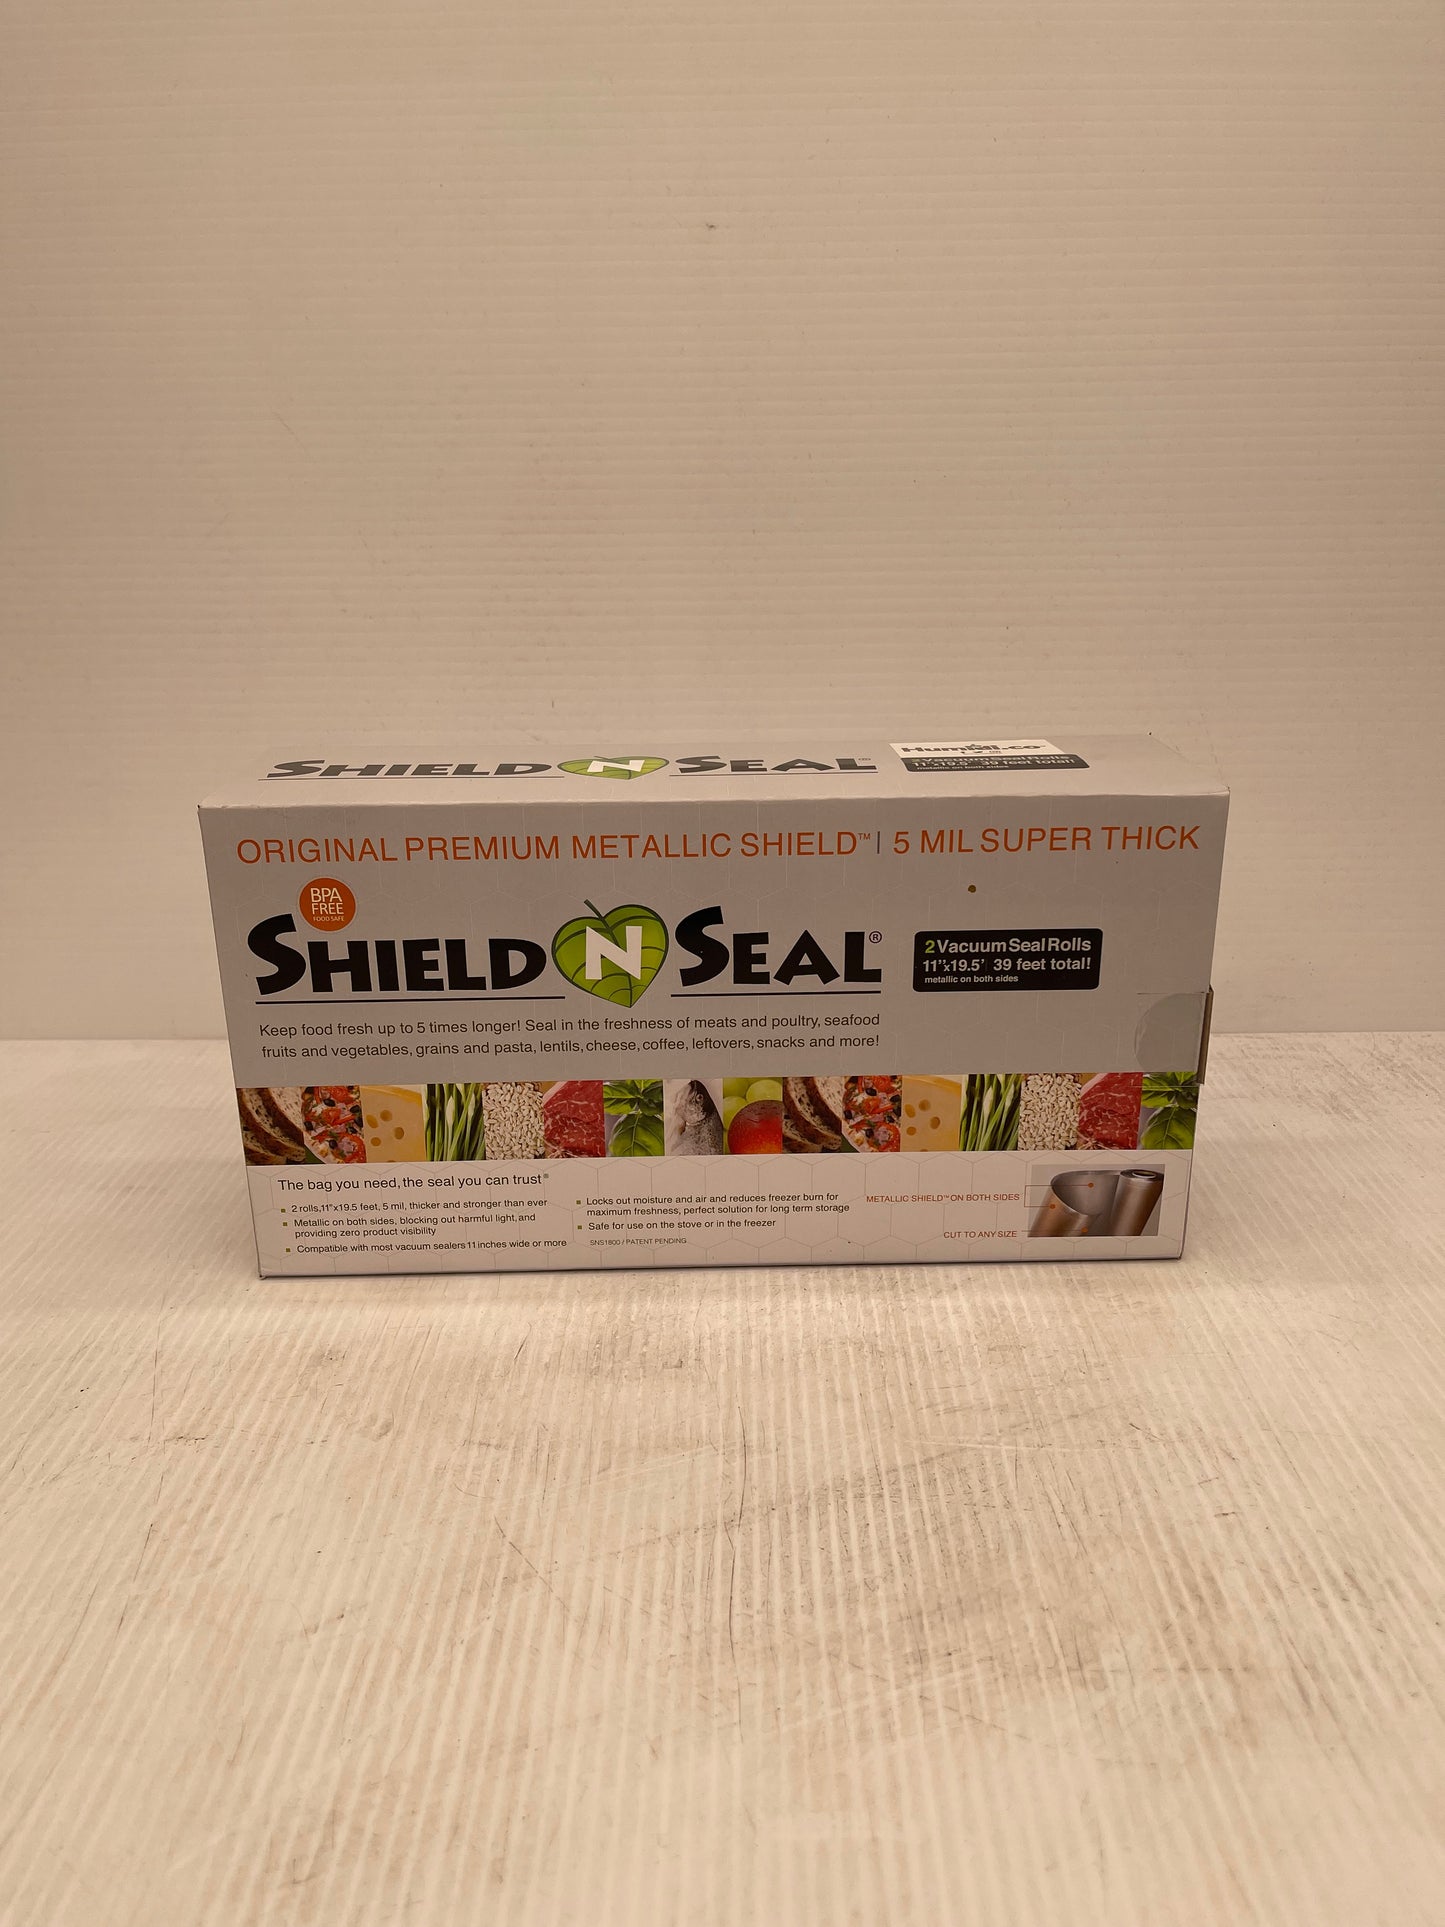 Shield and Seal (2) 11" x 19.5' All Mylar Rolls